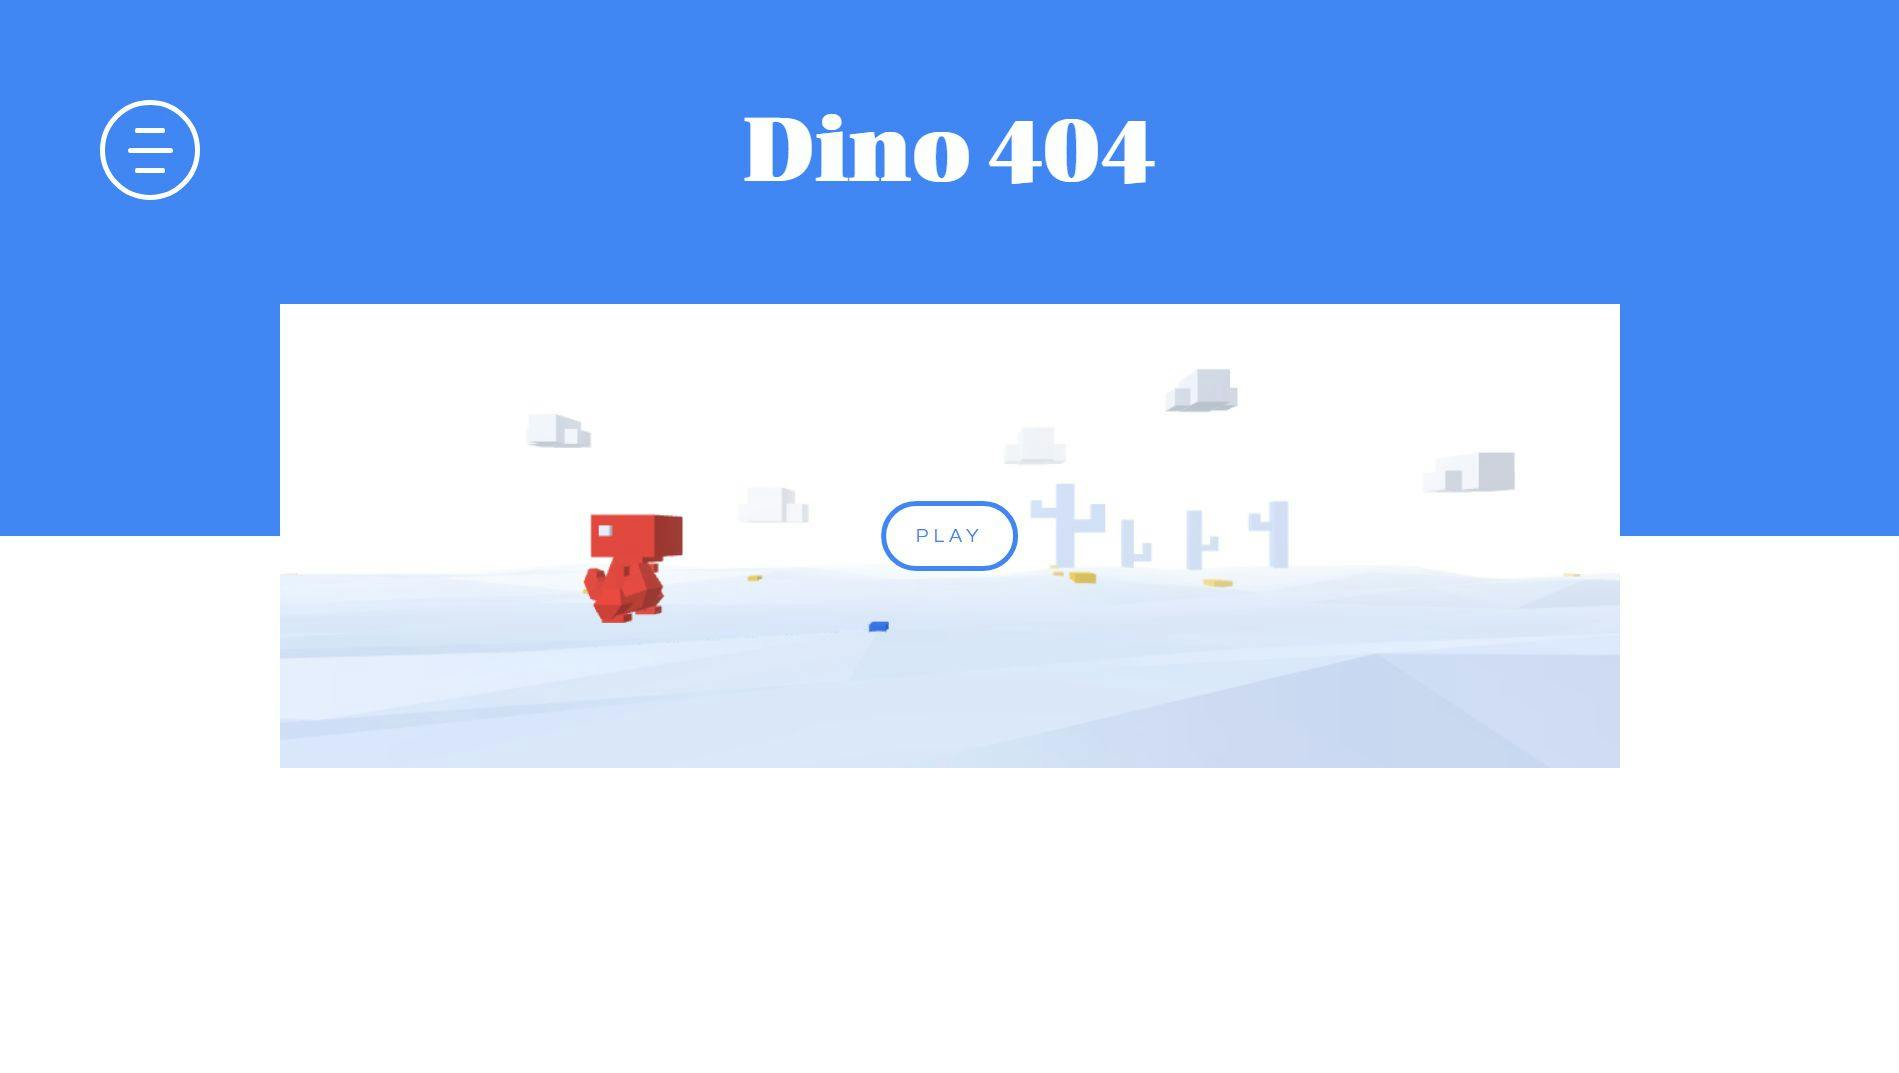 A low poly version of the game "Dino 404" that appears when you don't have access to internet